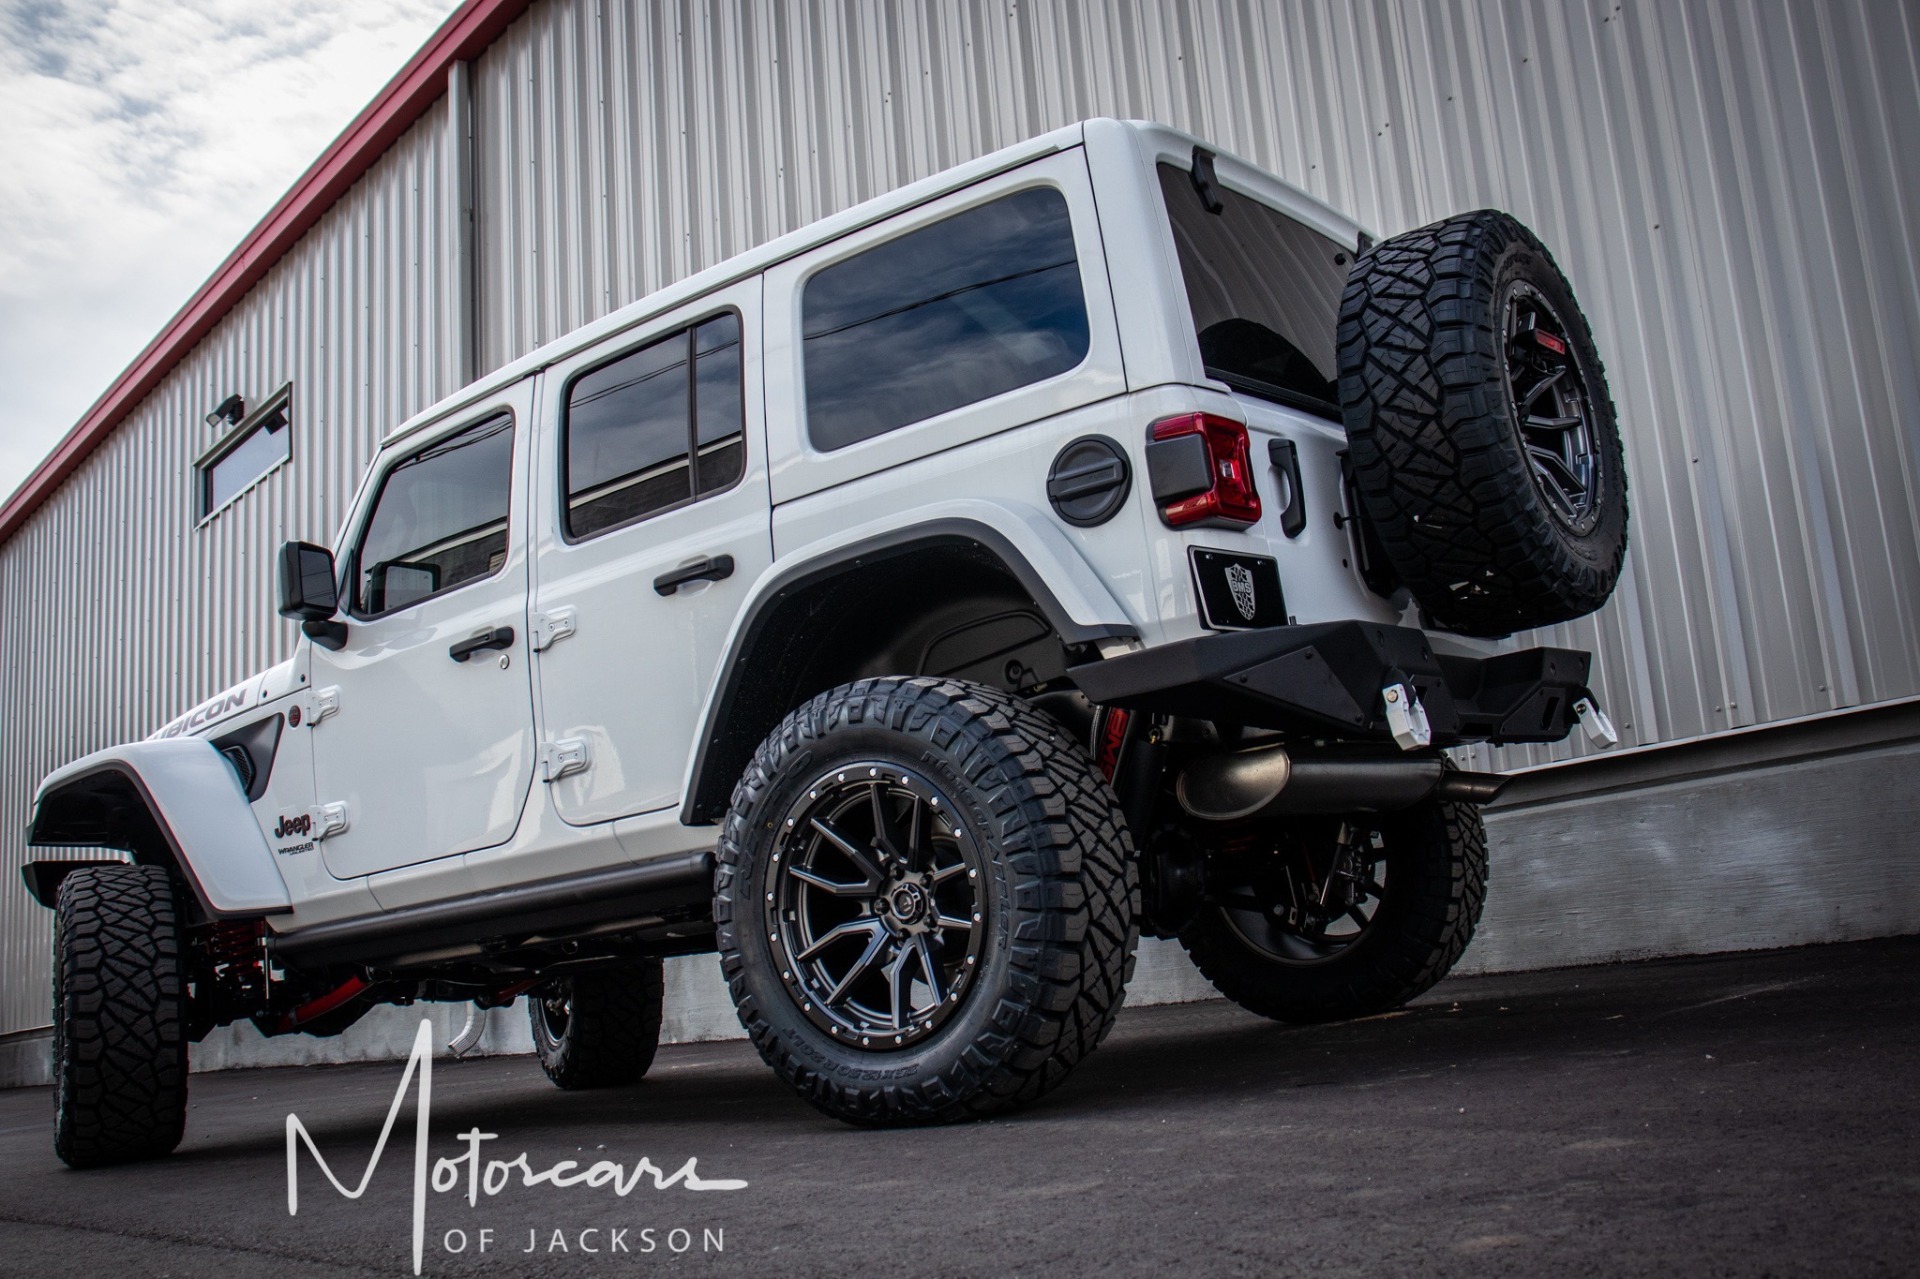 2020 Jeep Wrangler Unlimited Rubicon Stock # LW289111 for sale near Jackson,  MS | MS Jeep Dealer